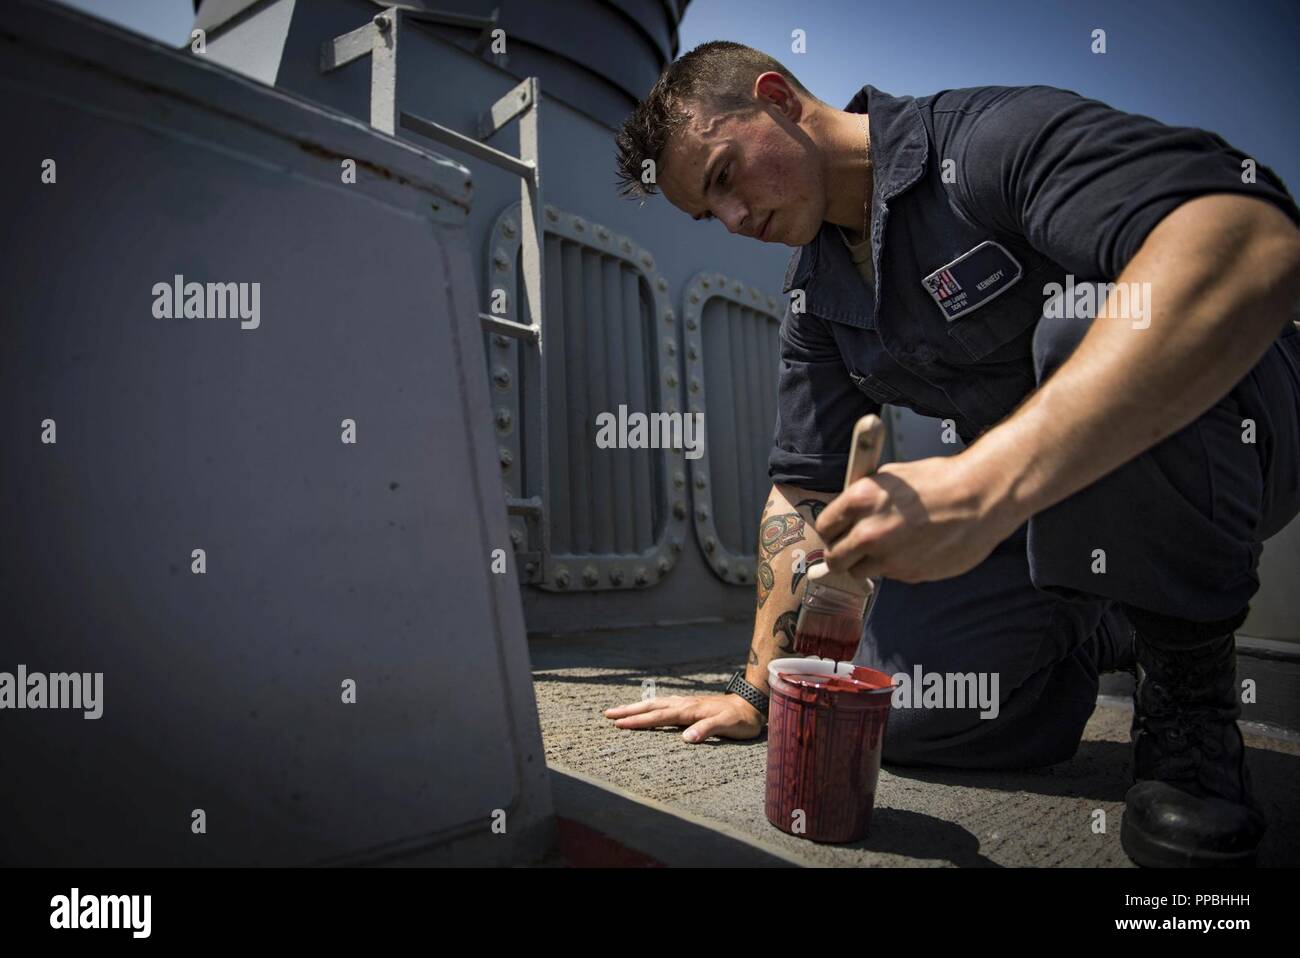 SEA (Aug. 28, 2018) Gunner’s Mate Seaman Jordan Kennedy paints aboard the Arleigh Burke-class guided-missile destroyer USS Carney (DDG 64) Aug. 28, 2018. Carney, forward-deployed to Rota, Spain, is on its fifth patrol in the U.S. 6th Fleet area of operations in support of regional allies and partners as well as U.S. national security interests in Europe and Africa. Stock Photo